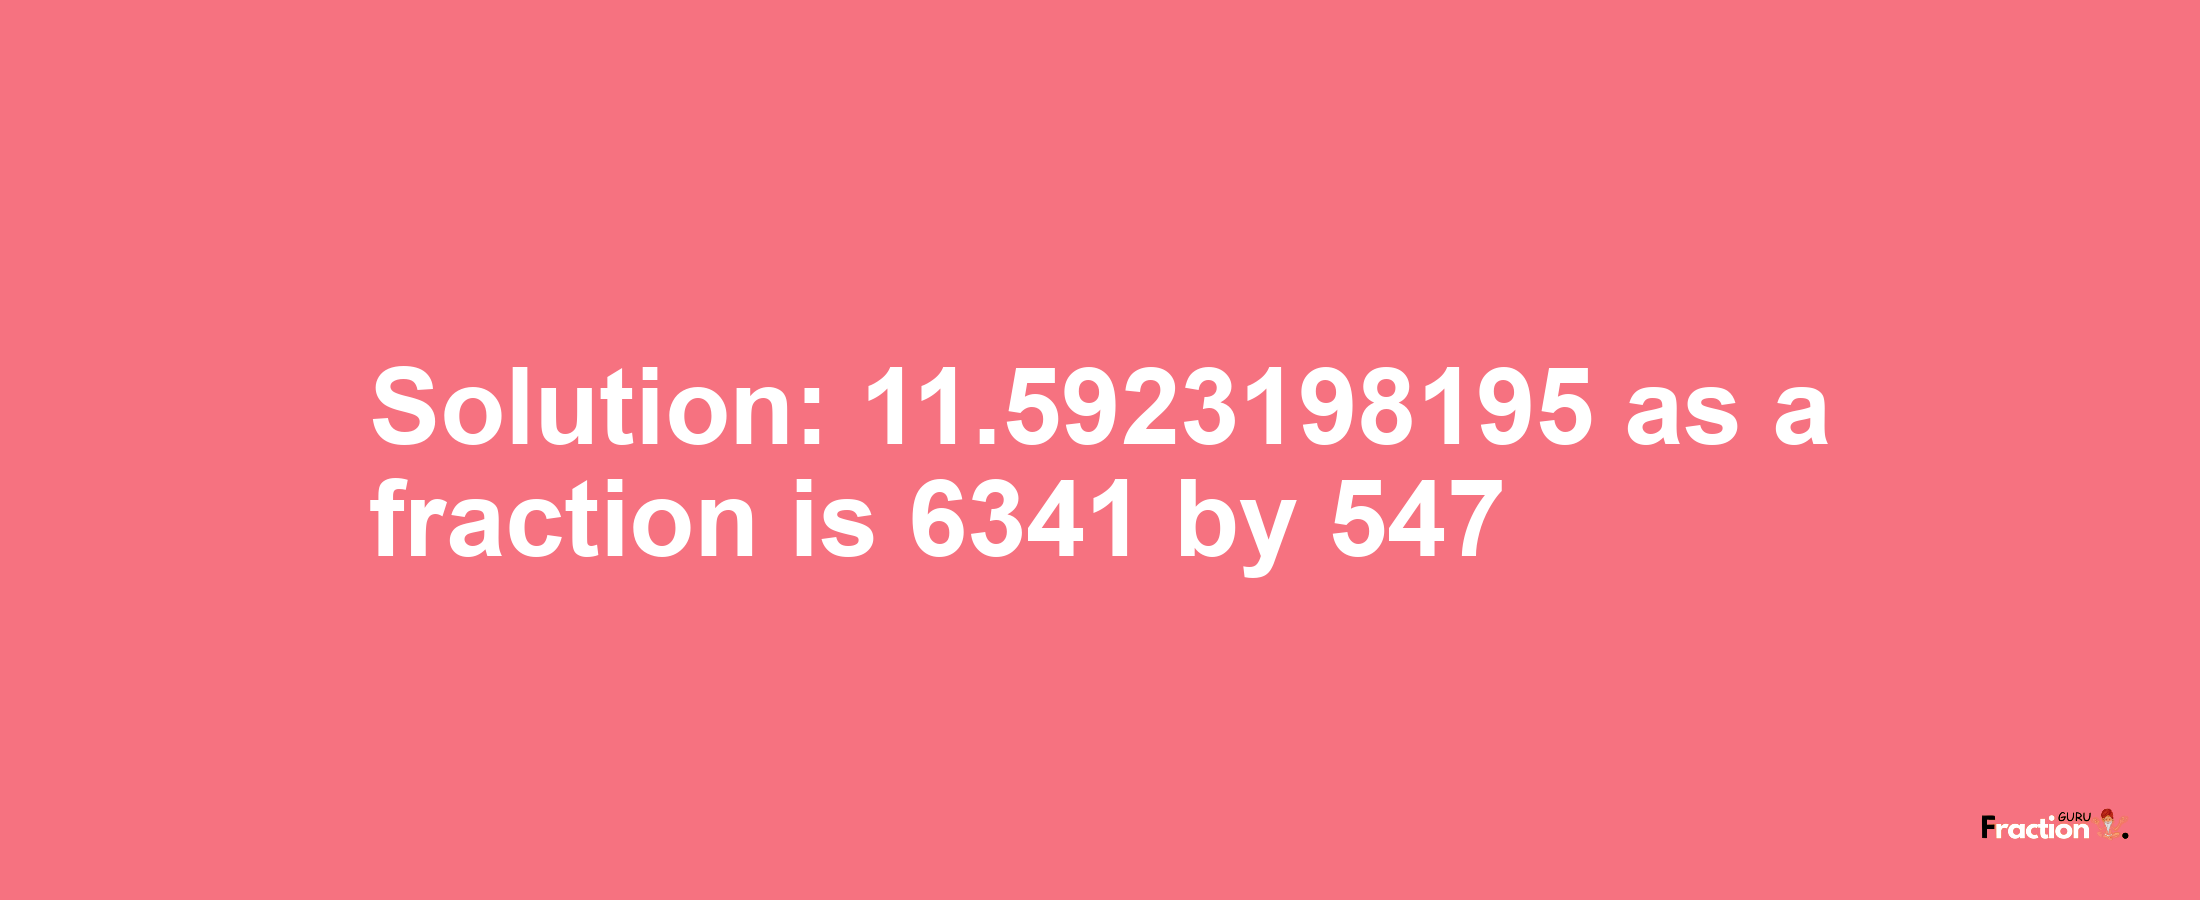 Solution:11.5923198195 as a fraction is 6341/547